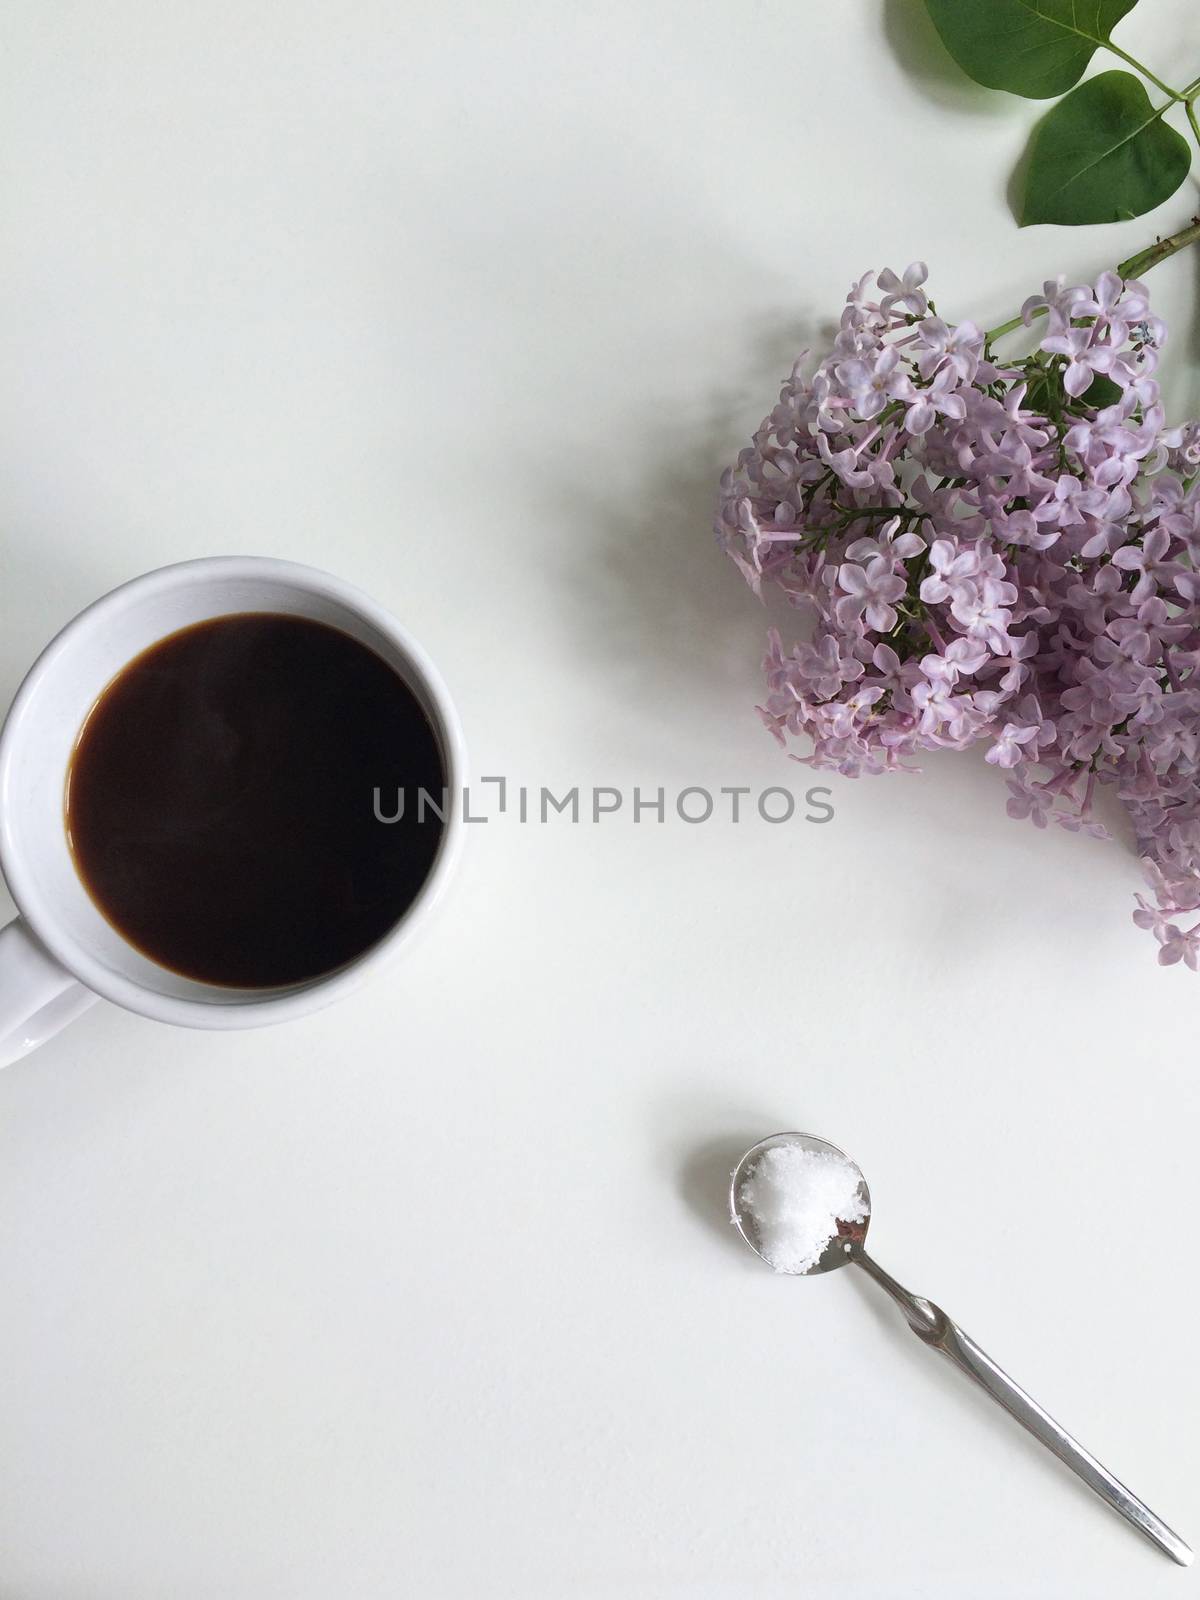 Black coffee in a cup, sugar on a spoon and fresh lilac flowers